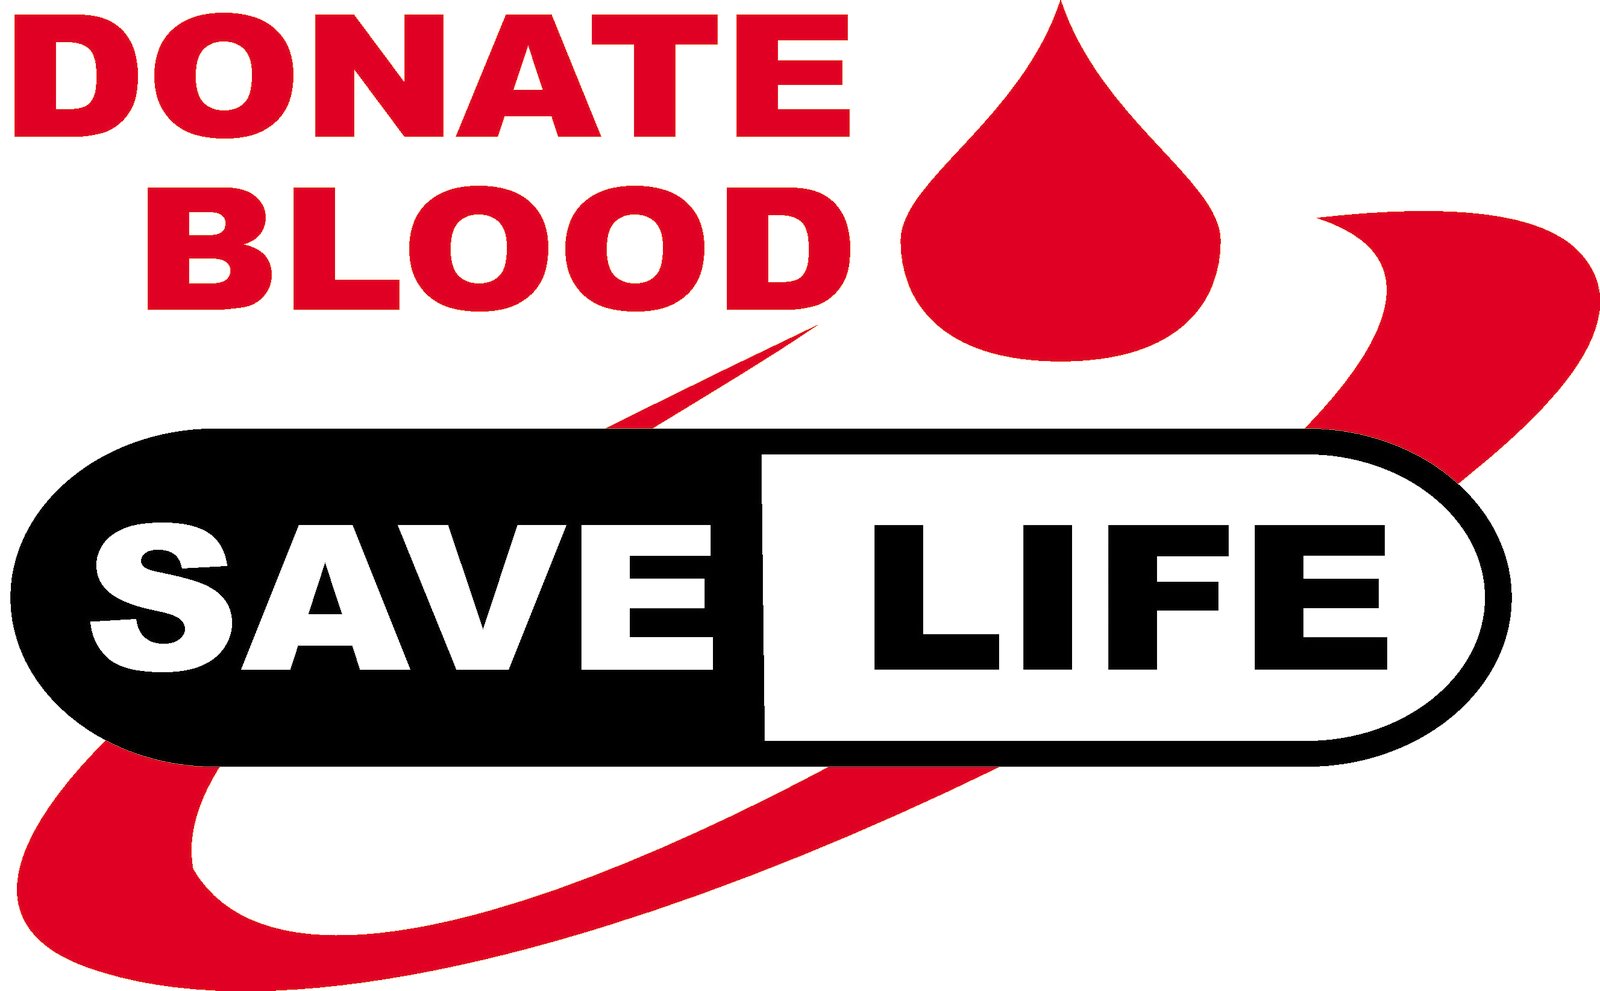 Blood Donation Needed During National Blood Donor Month